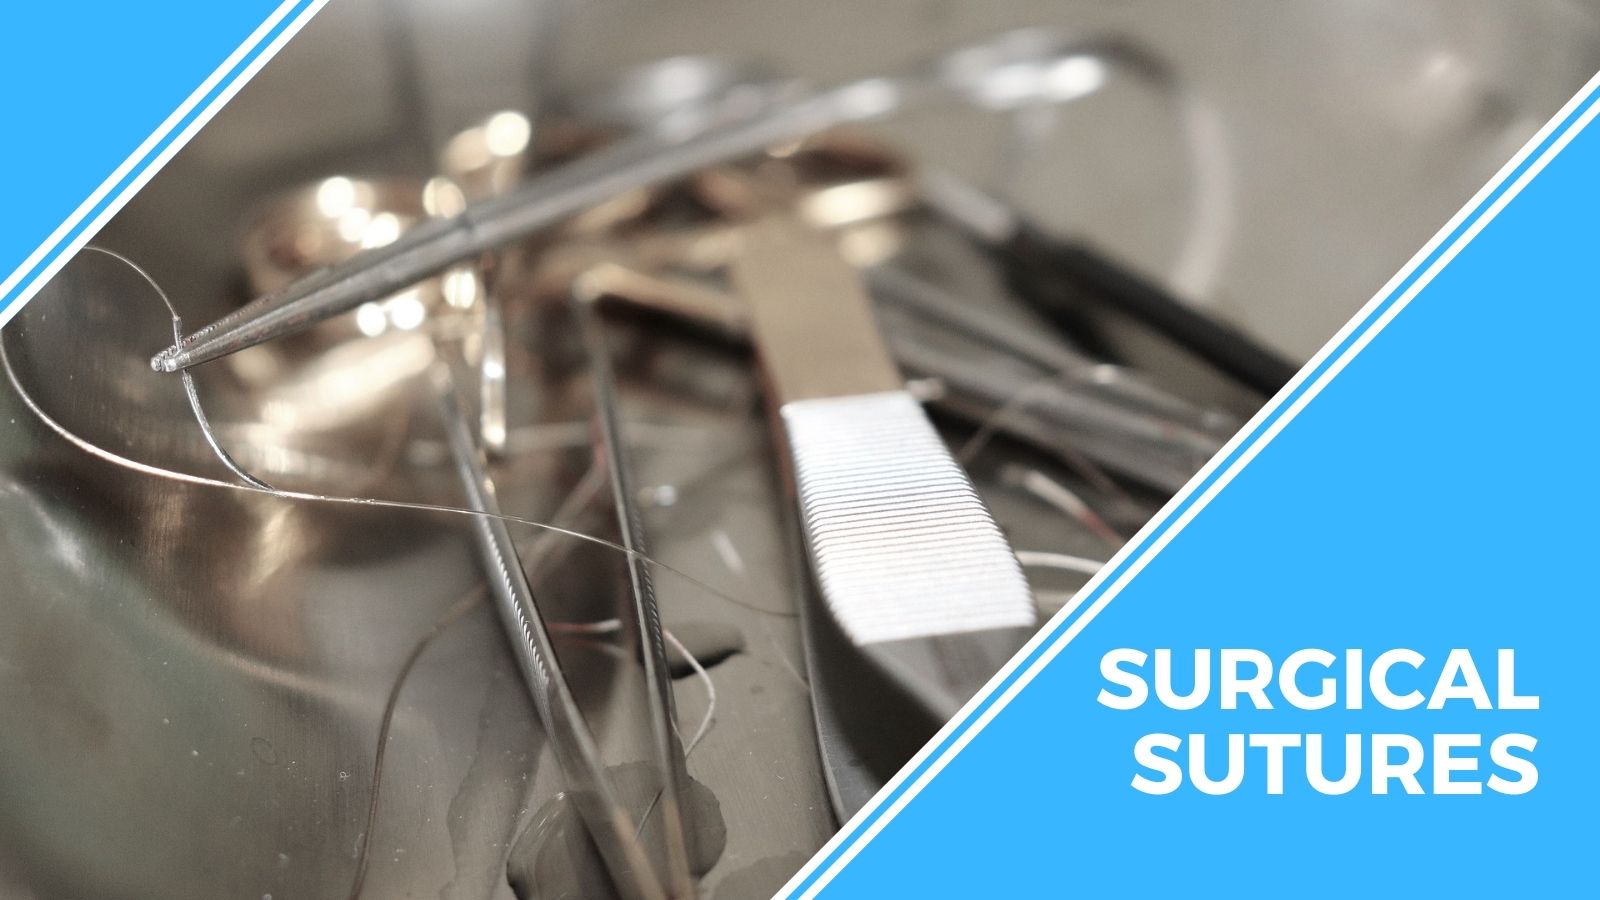 Everything You Need to Know About Surgical Sutures